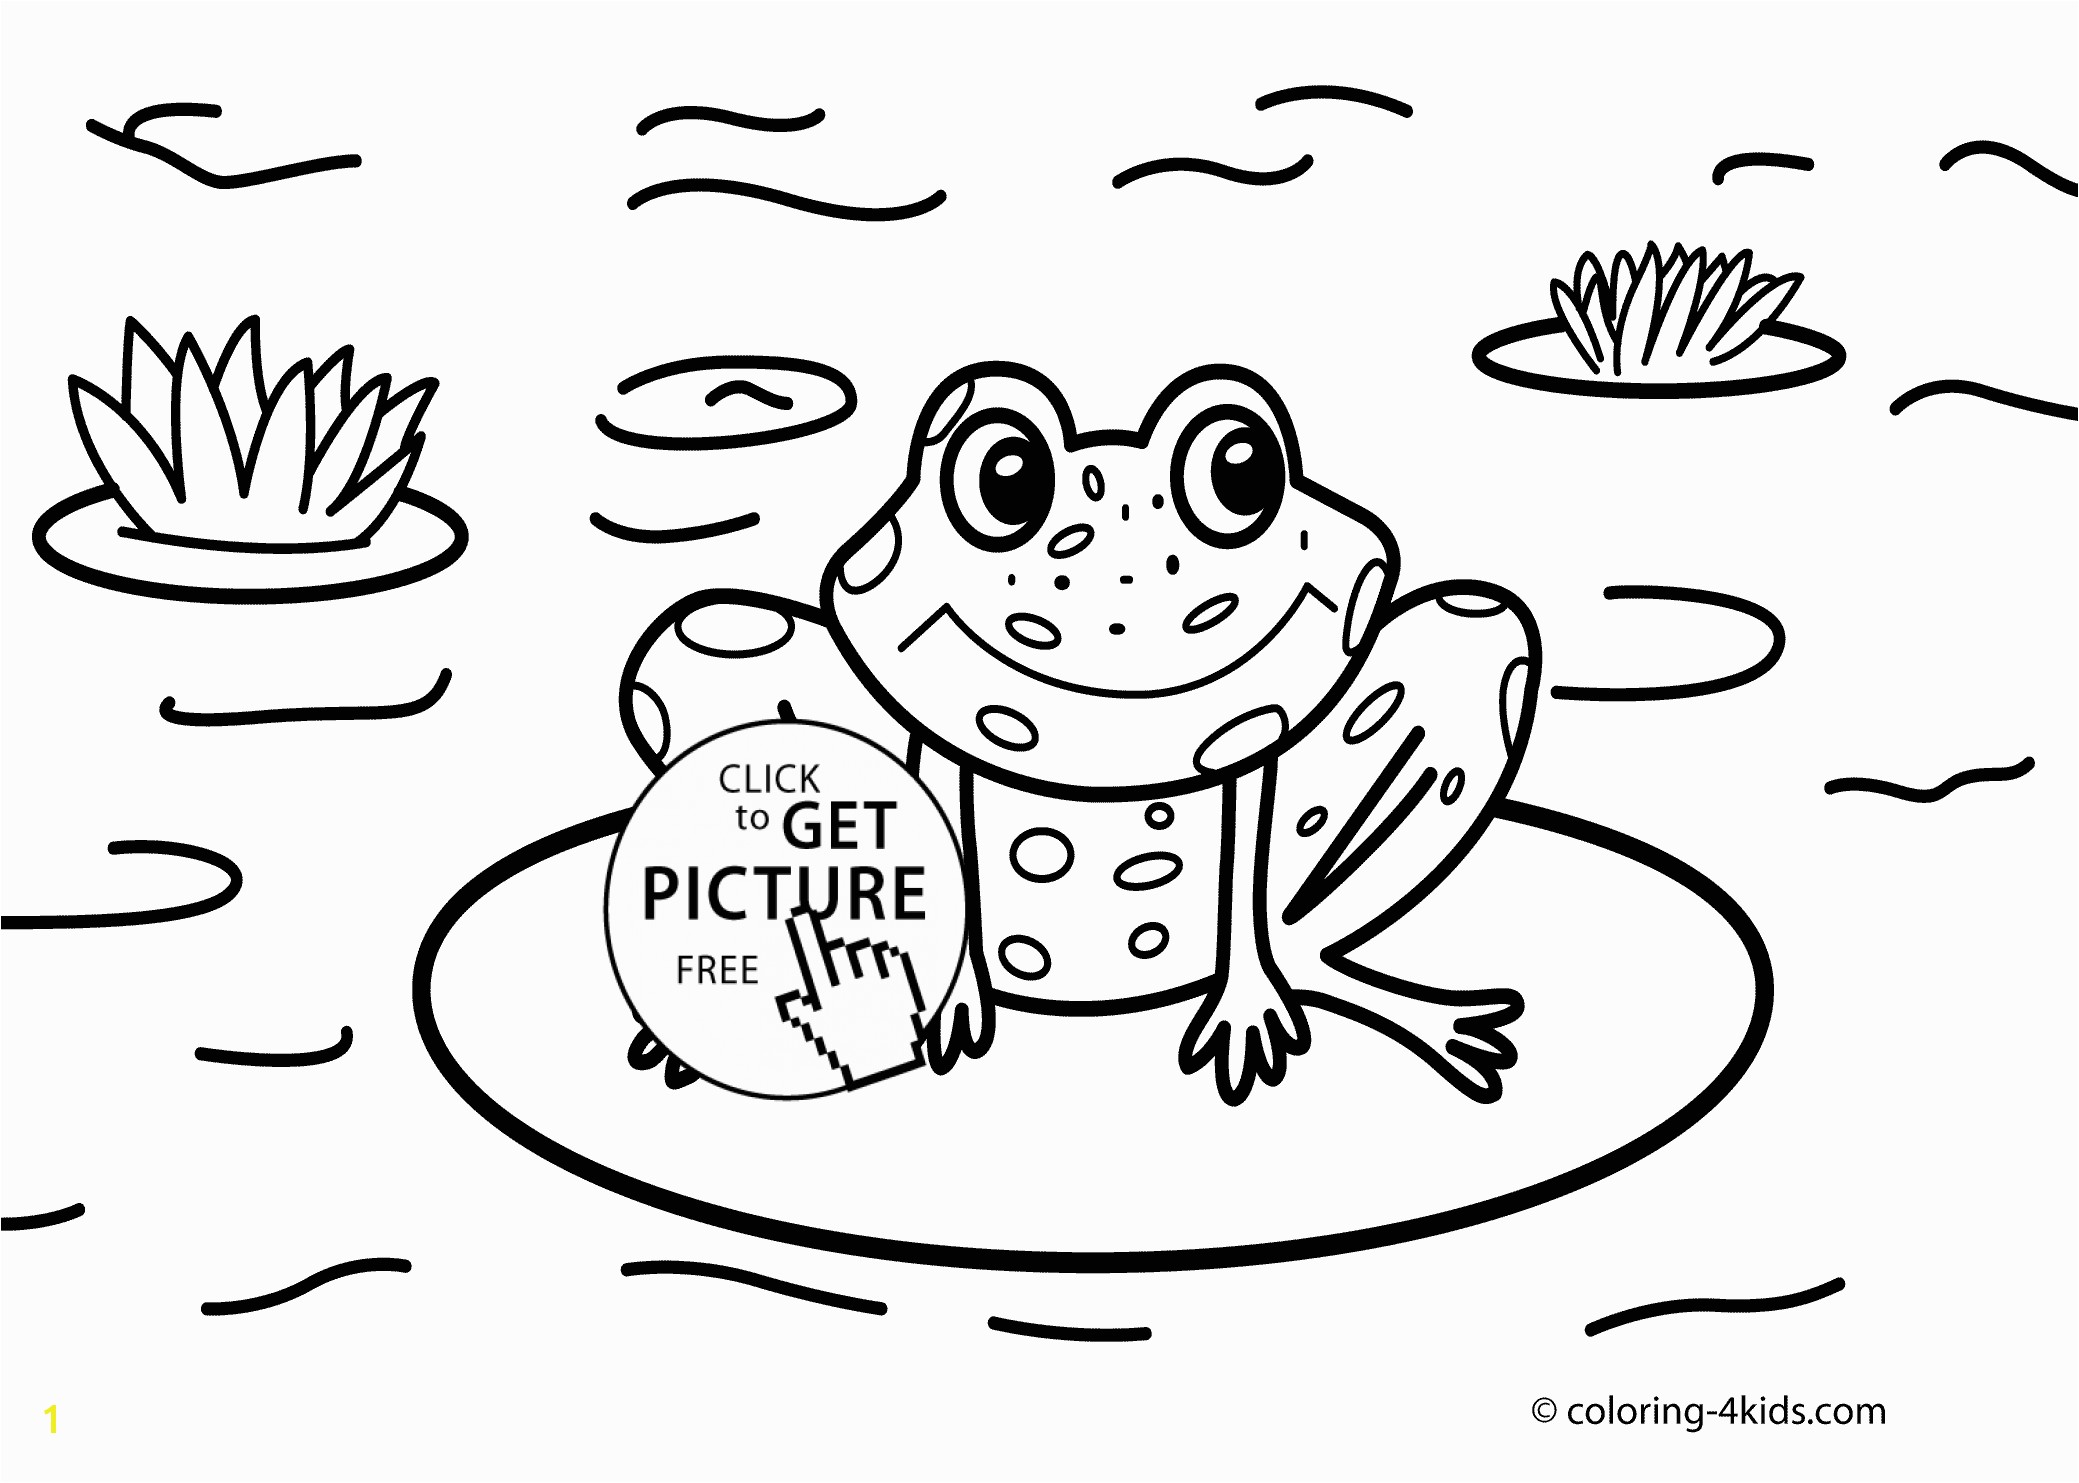 Lily Pad Coloring Page Free Ideas Frog Coloring Sheet Color Picture A Animal Page Tree Ruva